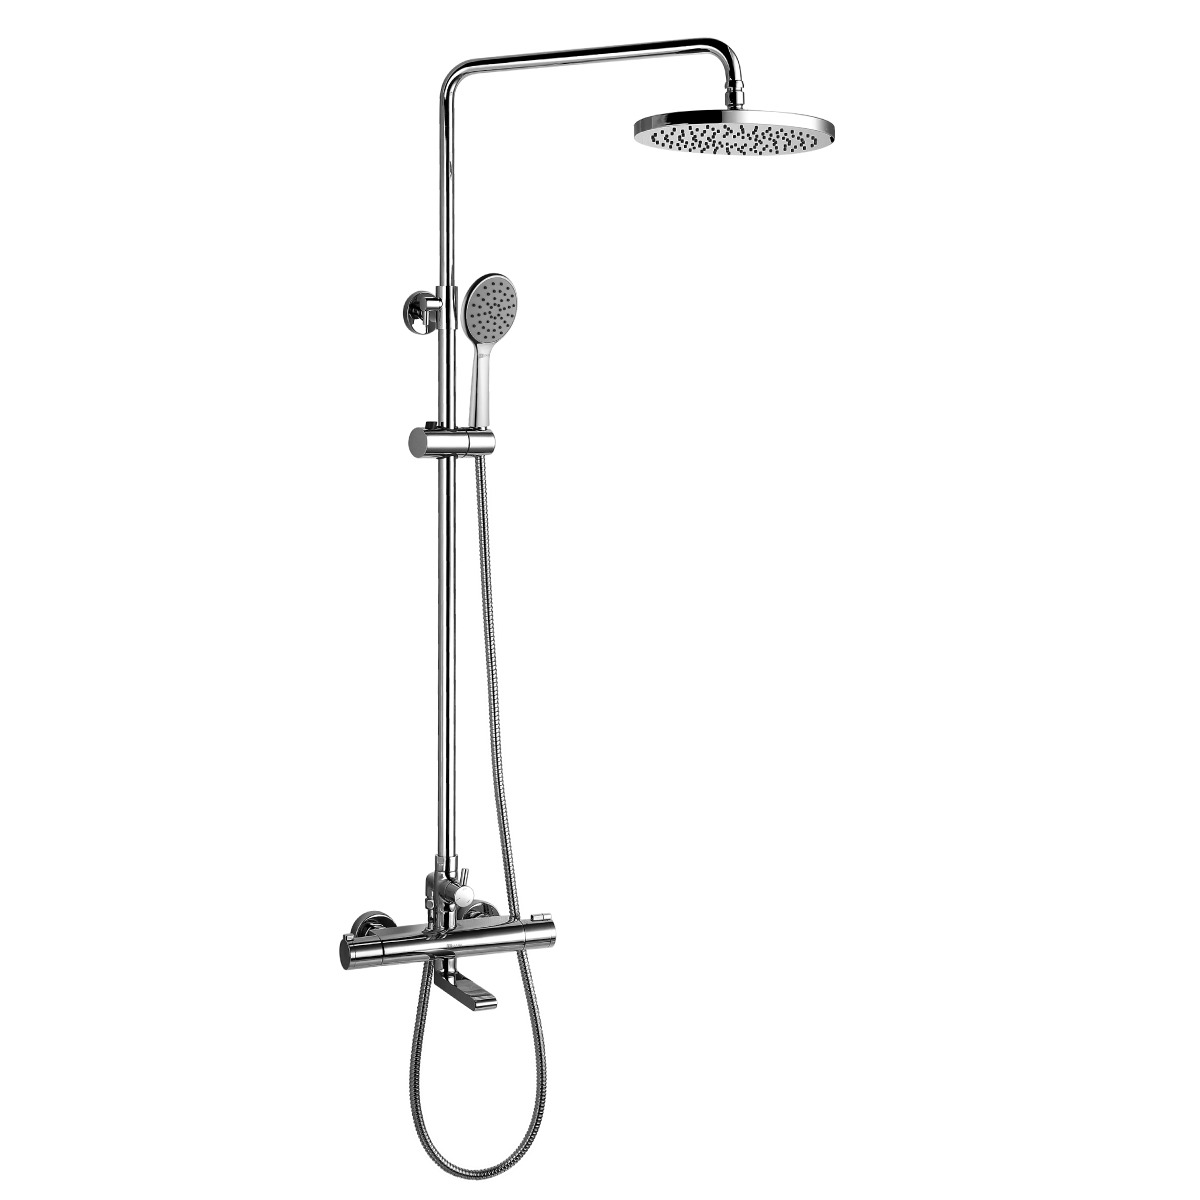 LM7862C Thermostatic bath and shower faucet with adjustable rod height, swivel spout and «Tropical rain» shower head